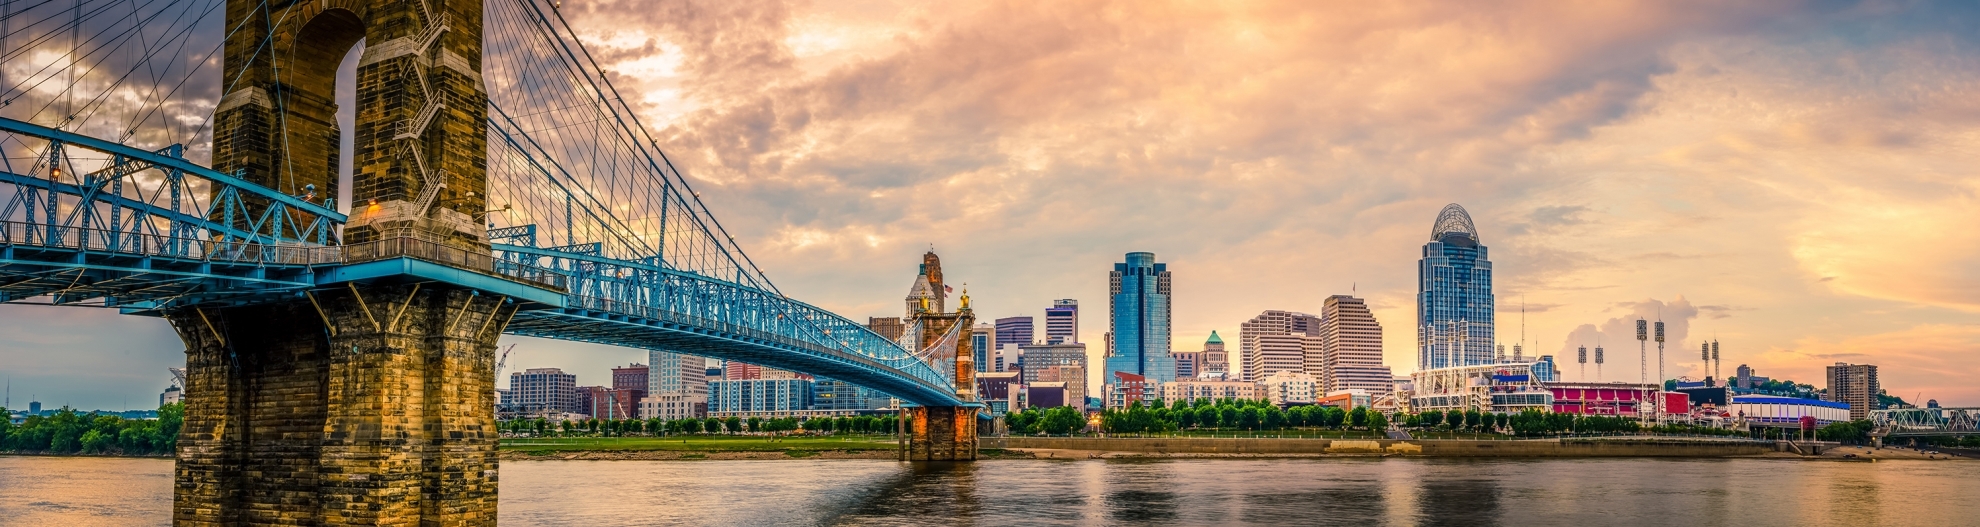 Panoramic view of John A. Roebling Suspension Bridge over the Ohio River and downtown Cincinnati skyline